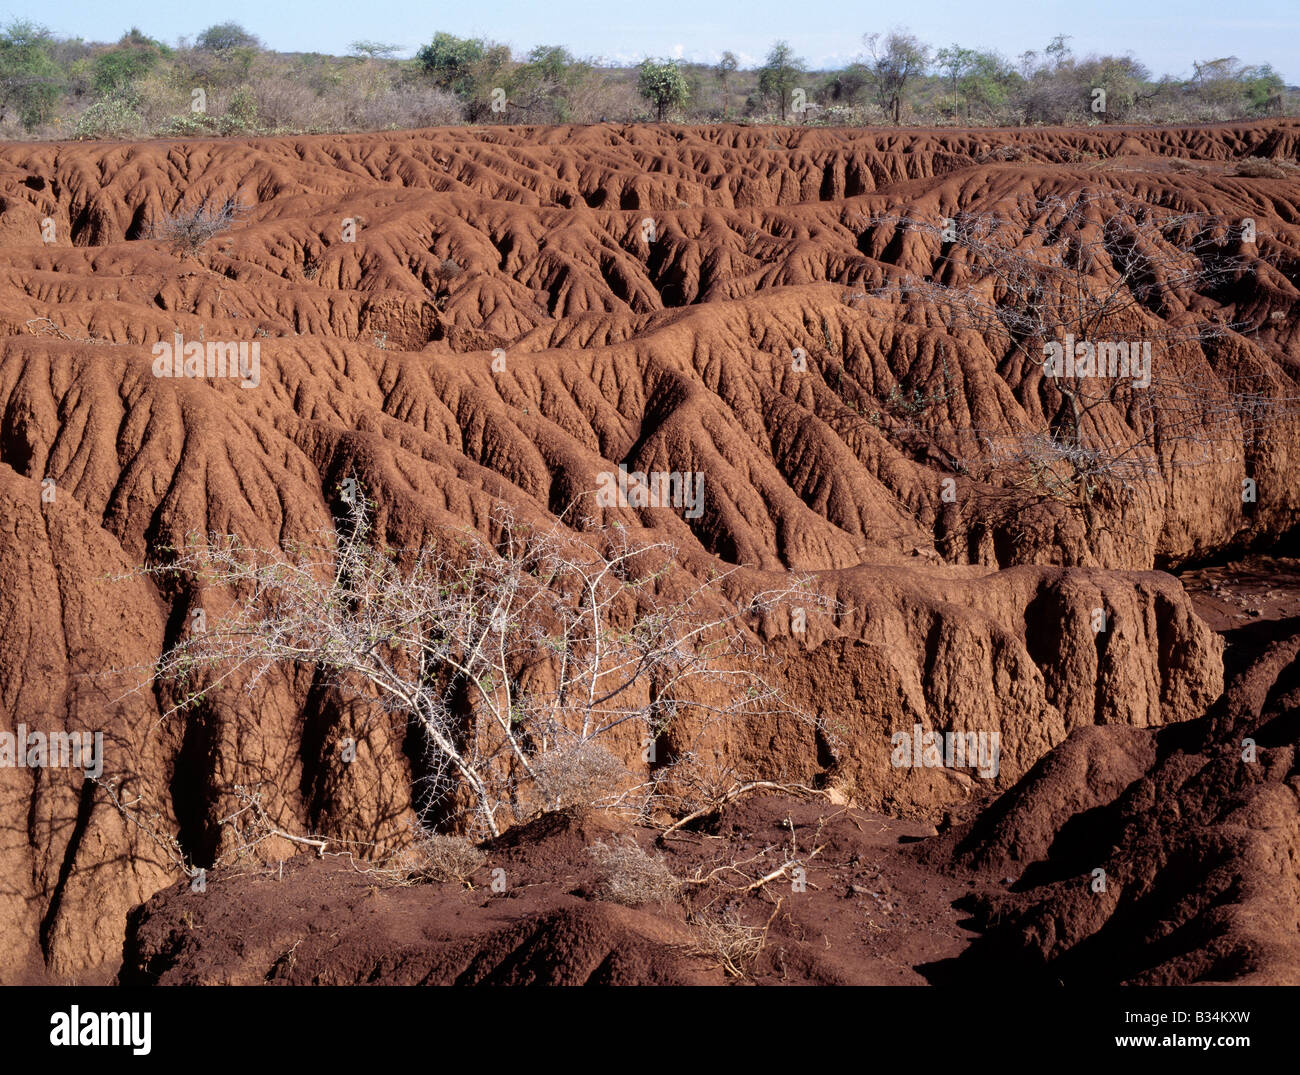 Kenya, Rift Valley Province, Baringo District. Serious soil erosion in Baringo District caused by poor agricultural methods and Stock Photo